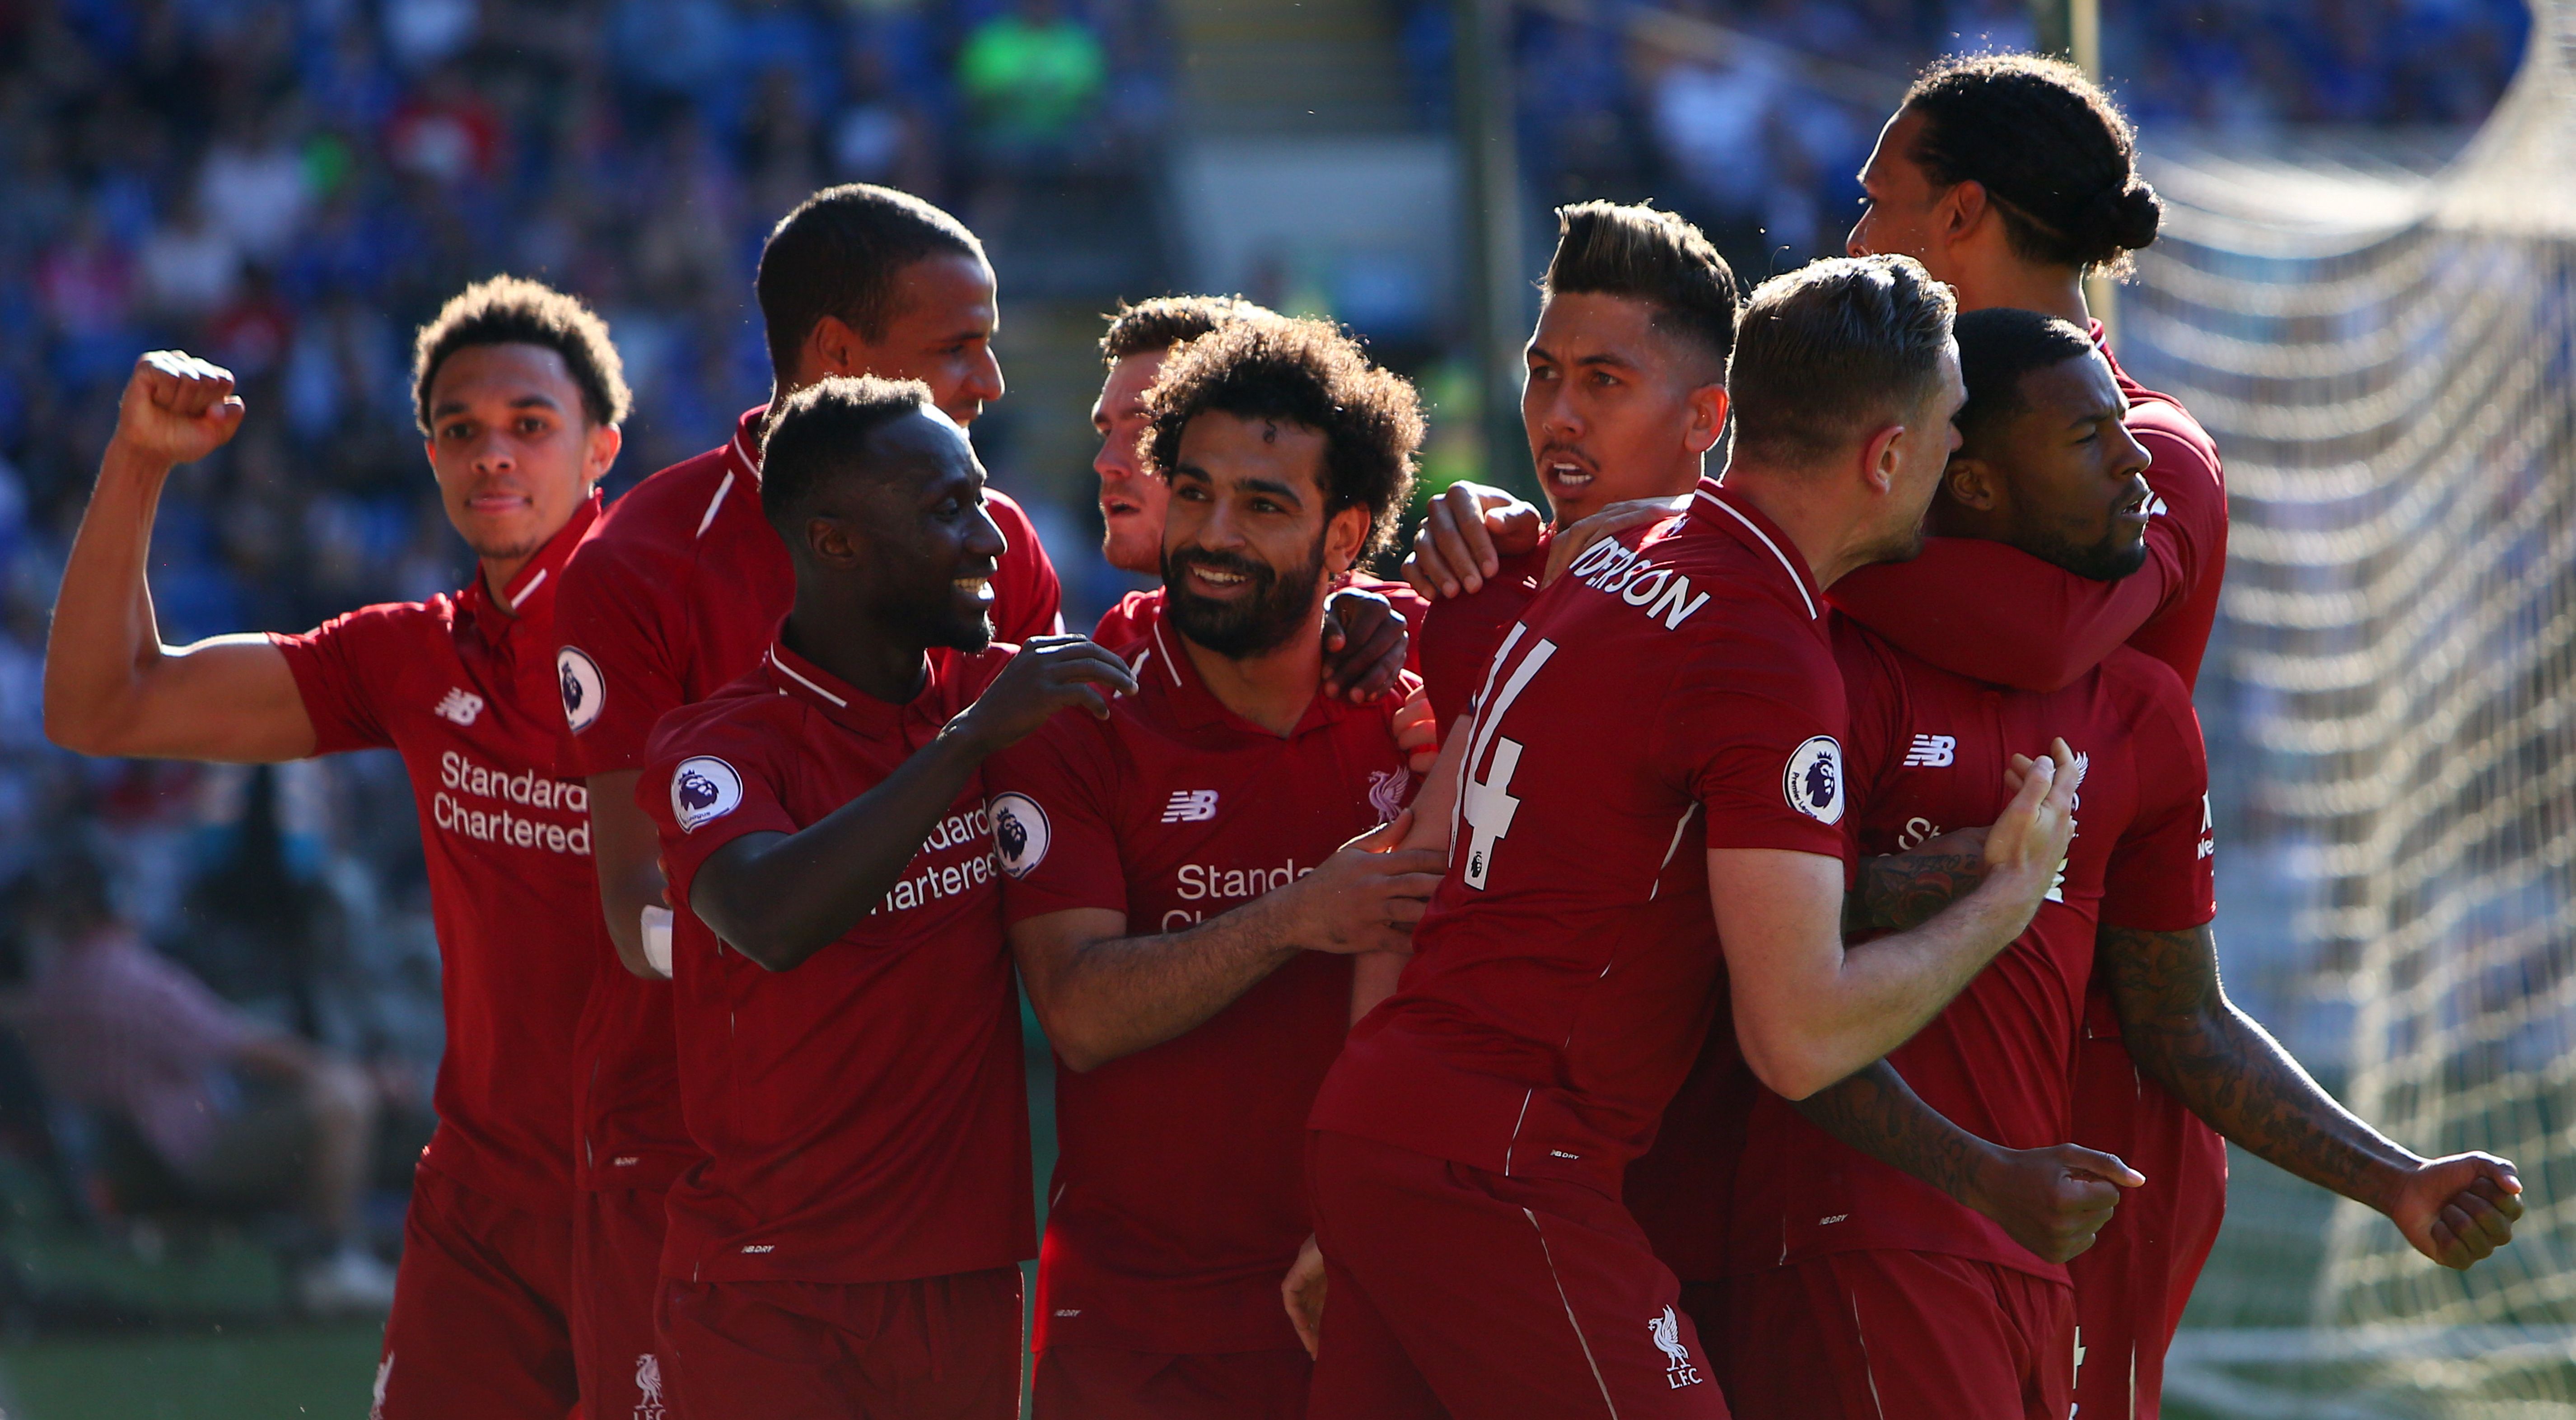 Liverpool's Dutch midfielder Georginio Wijnaldum (R) celebrates scoring the opening goal during the English Premier League football match between between Cardiff City and Liverpool at Cardiff City Stadium in Cardiff, south Wales on April 21, 2019. (Photo by GEOFF CADDICK / AFP) / RESTRICTED TO EDITORIAL USE. No use with unauthorized audio, video, data, fixture lists, club/league logos or 'live' services. Online in-match use limited to 120 images. An additional 40 images may be used in extra time. No video emulation. Social media in-match use limited to 120 images. An additional 40 images may be used in extra time. No use in betting publications, games or single club/league/player publications. /         (Photo credit should read GEOFF CADDICK/AFP/Getty Images)